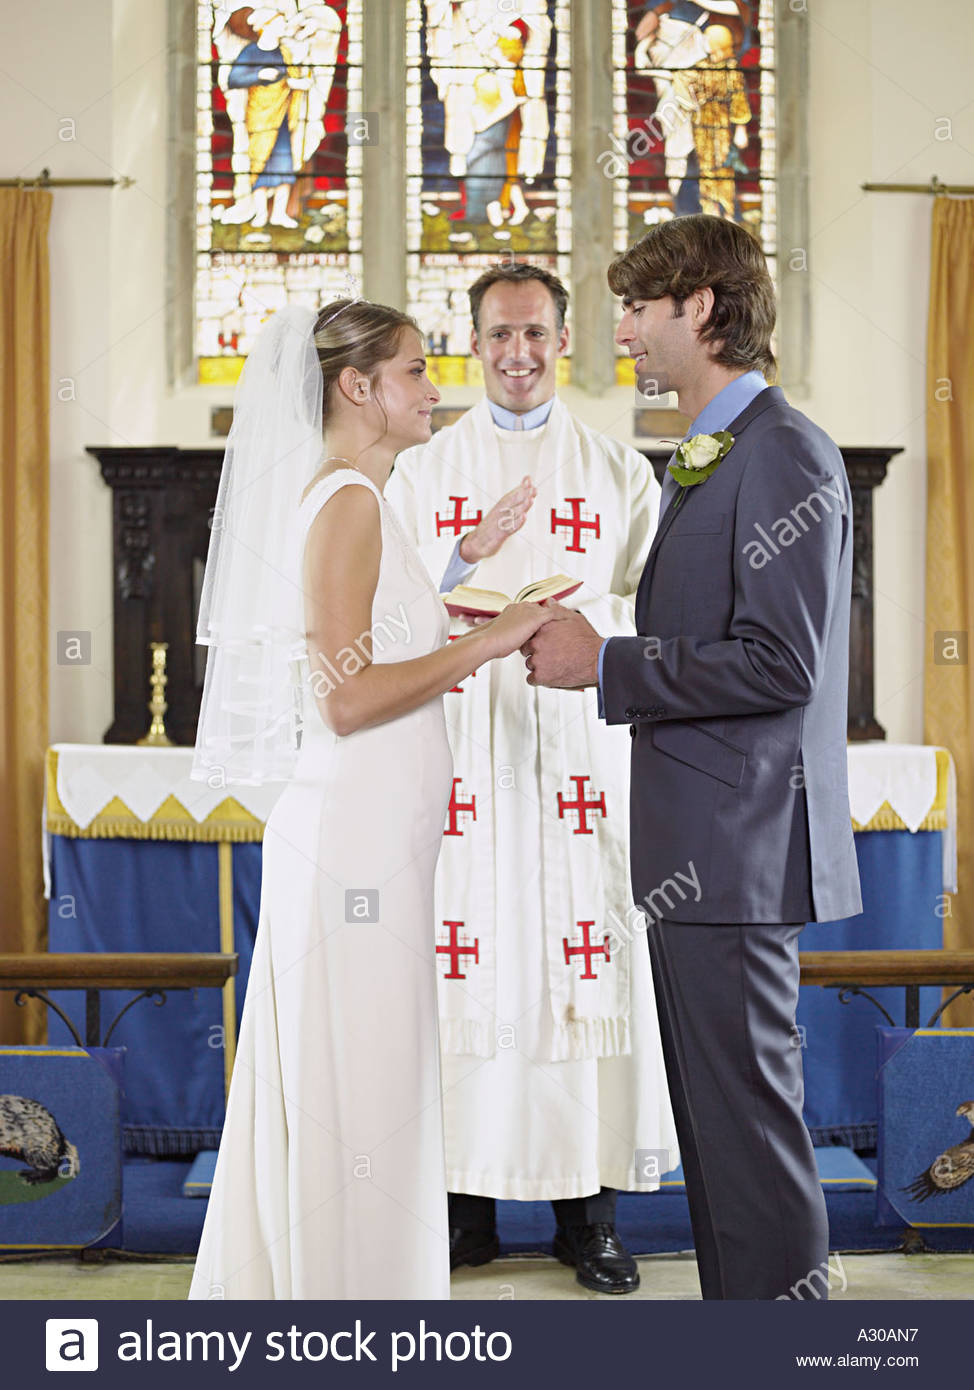 Bride And Groom Saying Wedding Vows Stock Photo 6073302 Alamy